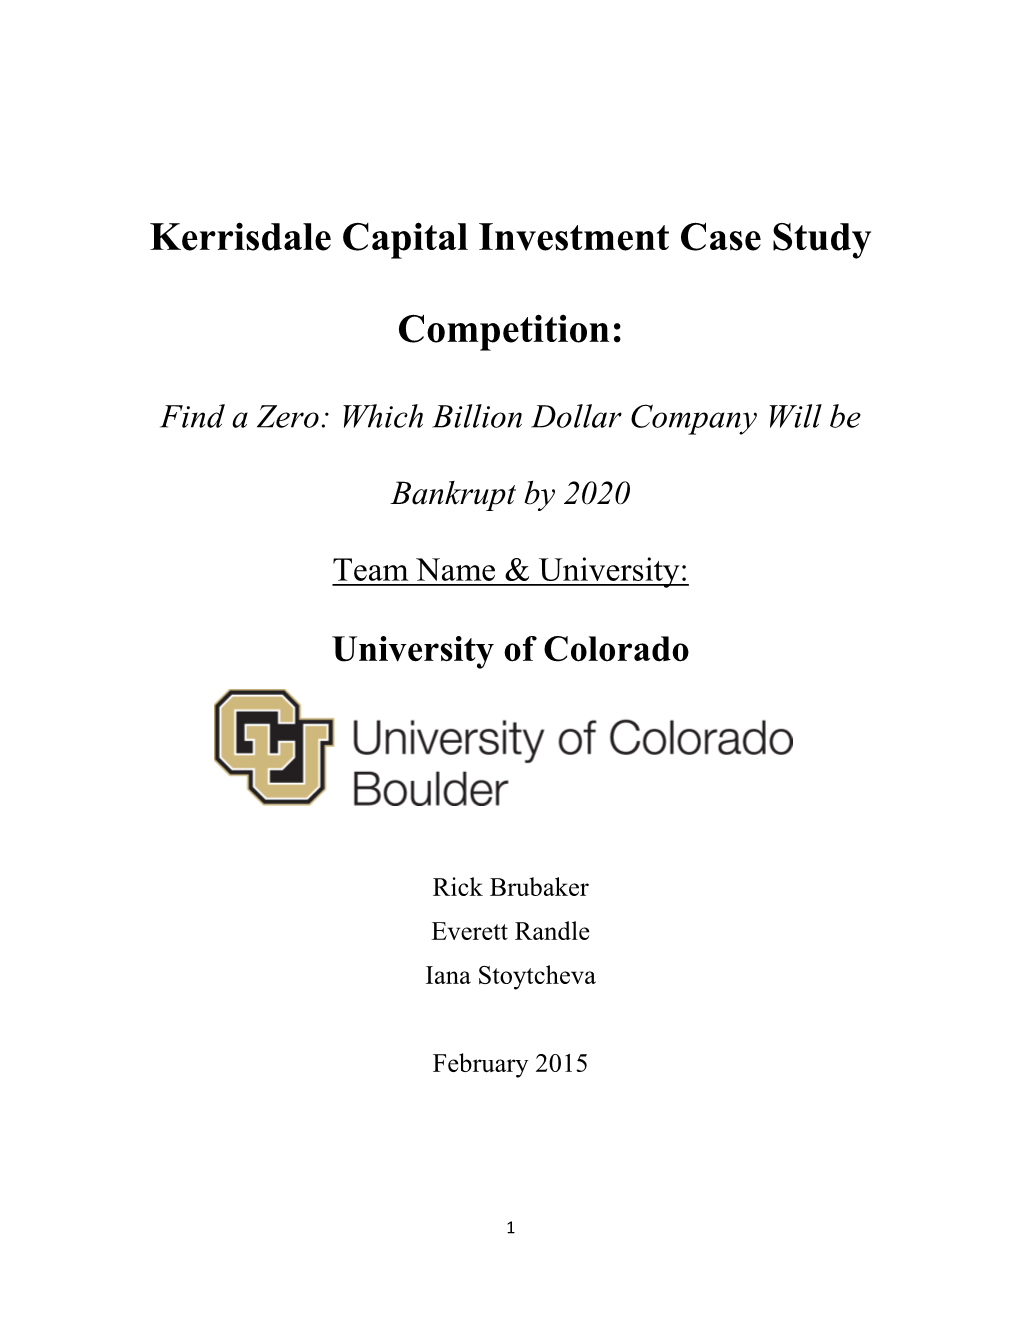 Kerrisdale Capital Investment Case Study Competition